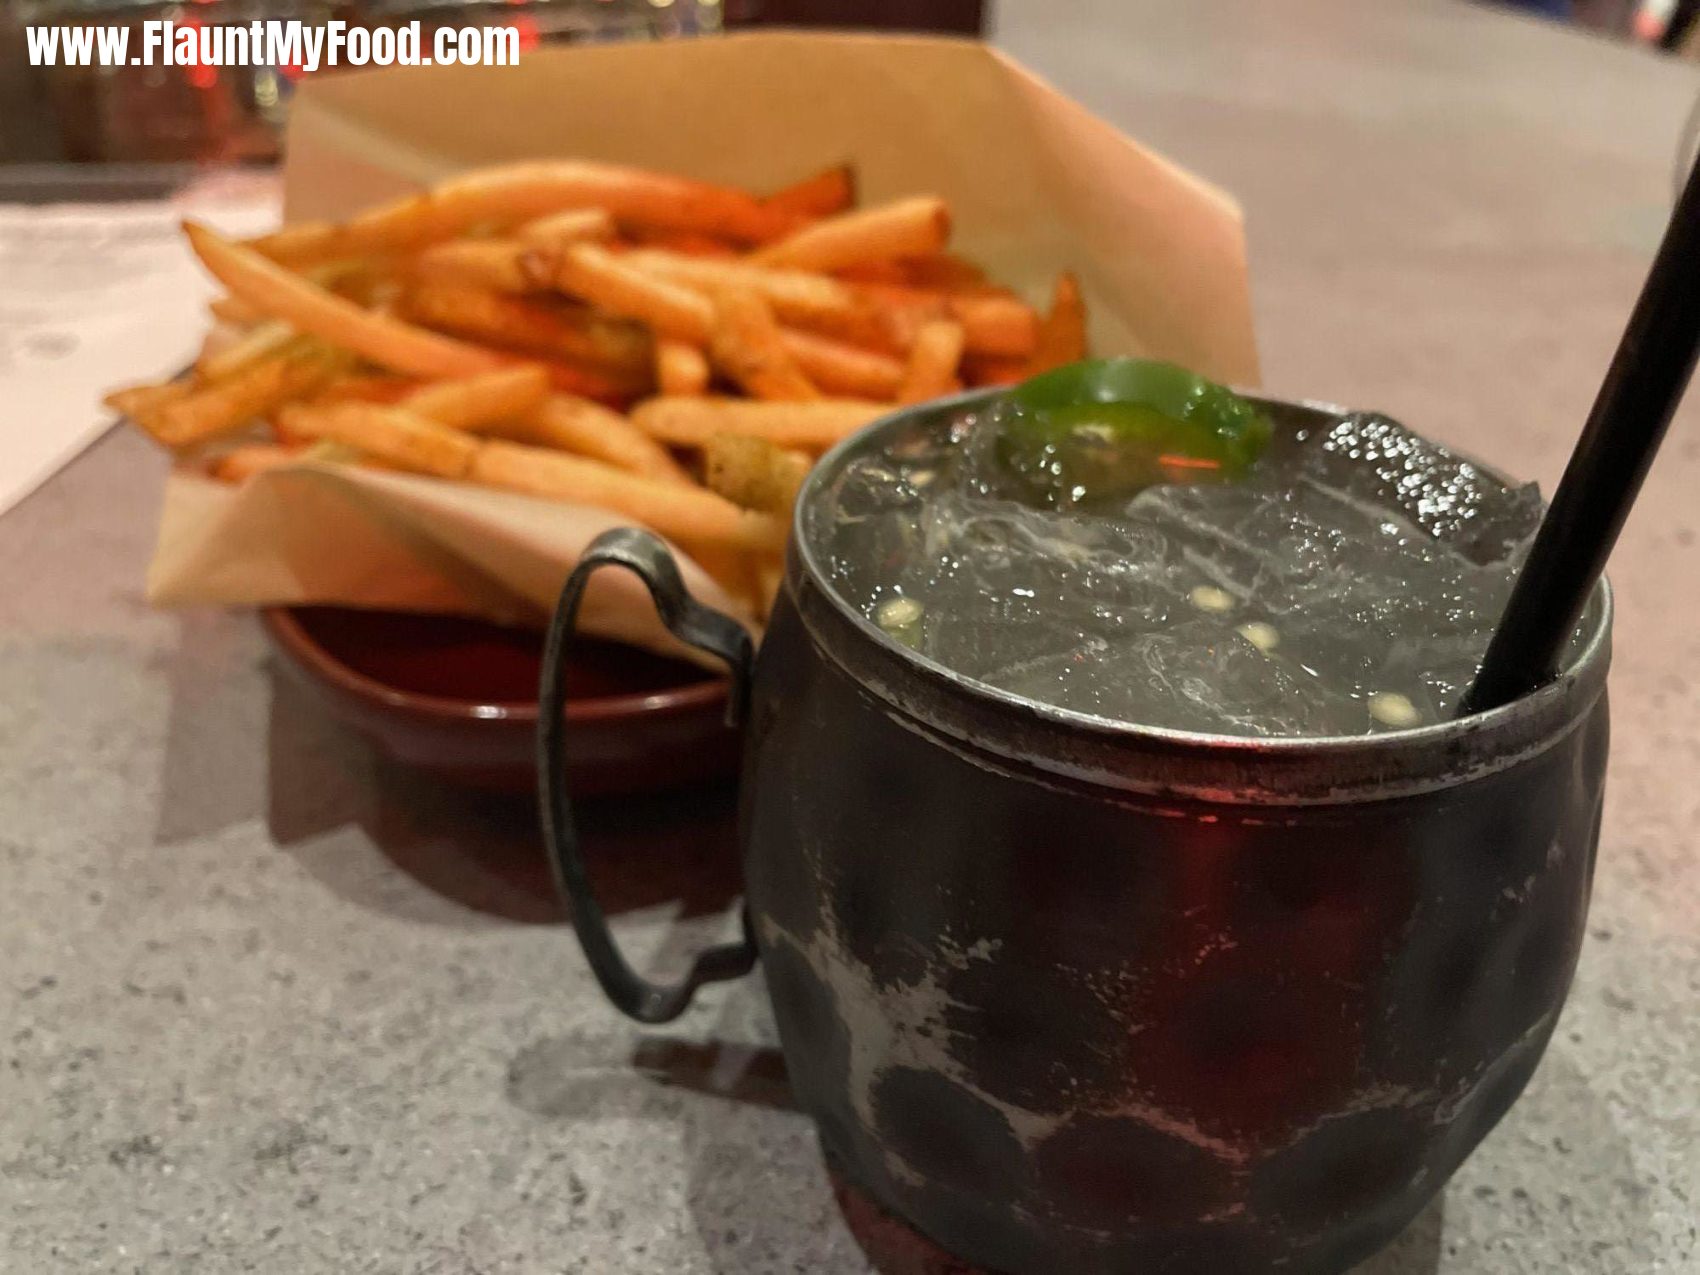 Tricky Fish in Fort Worth Texas - fries and Moscow mule at the tricky fish